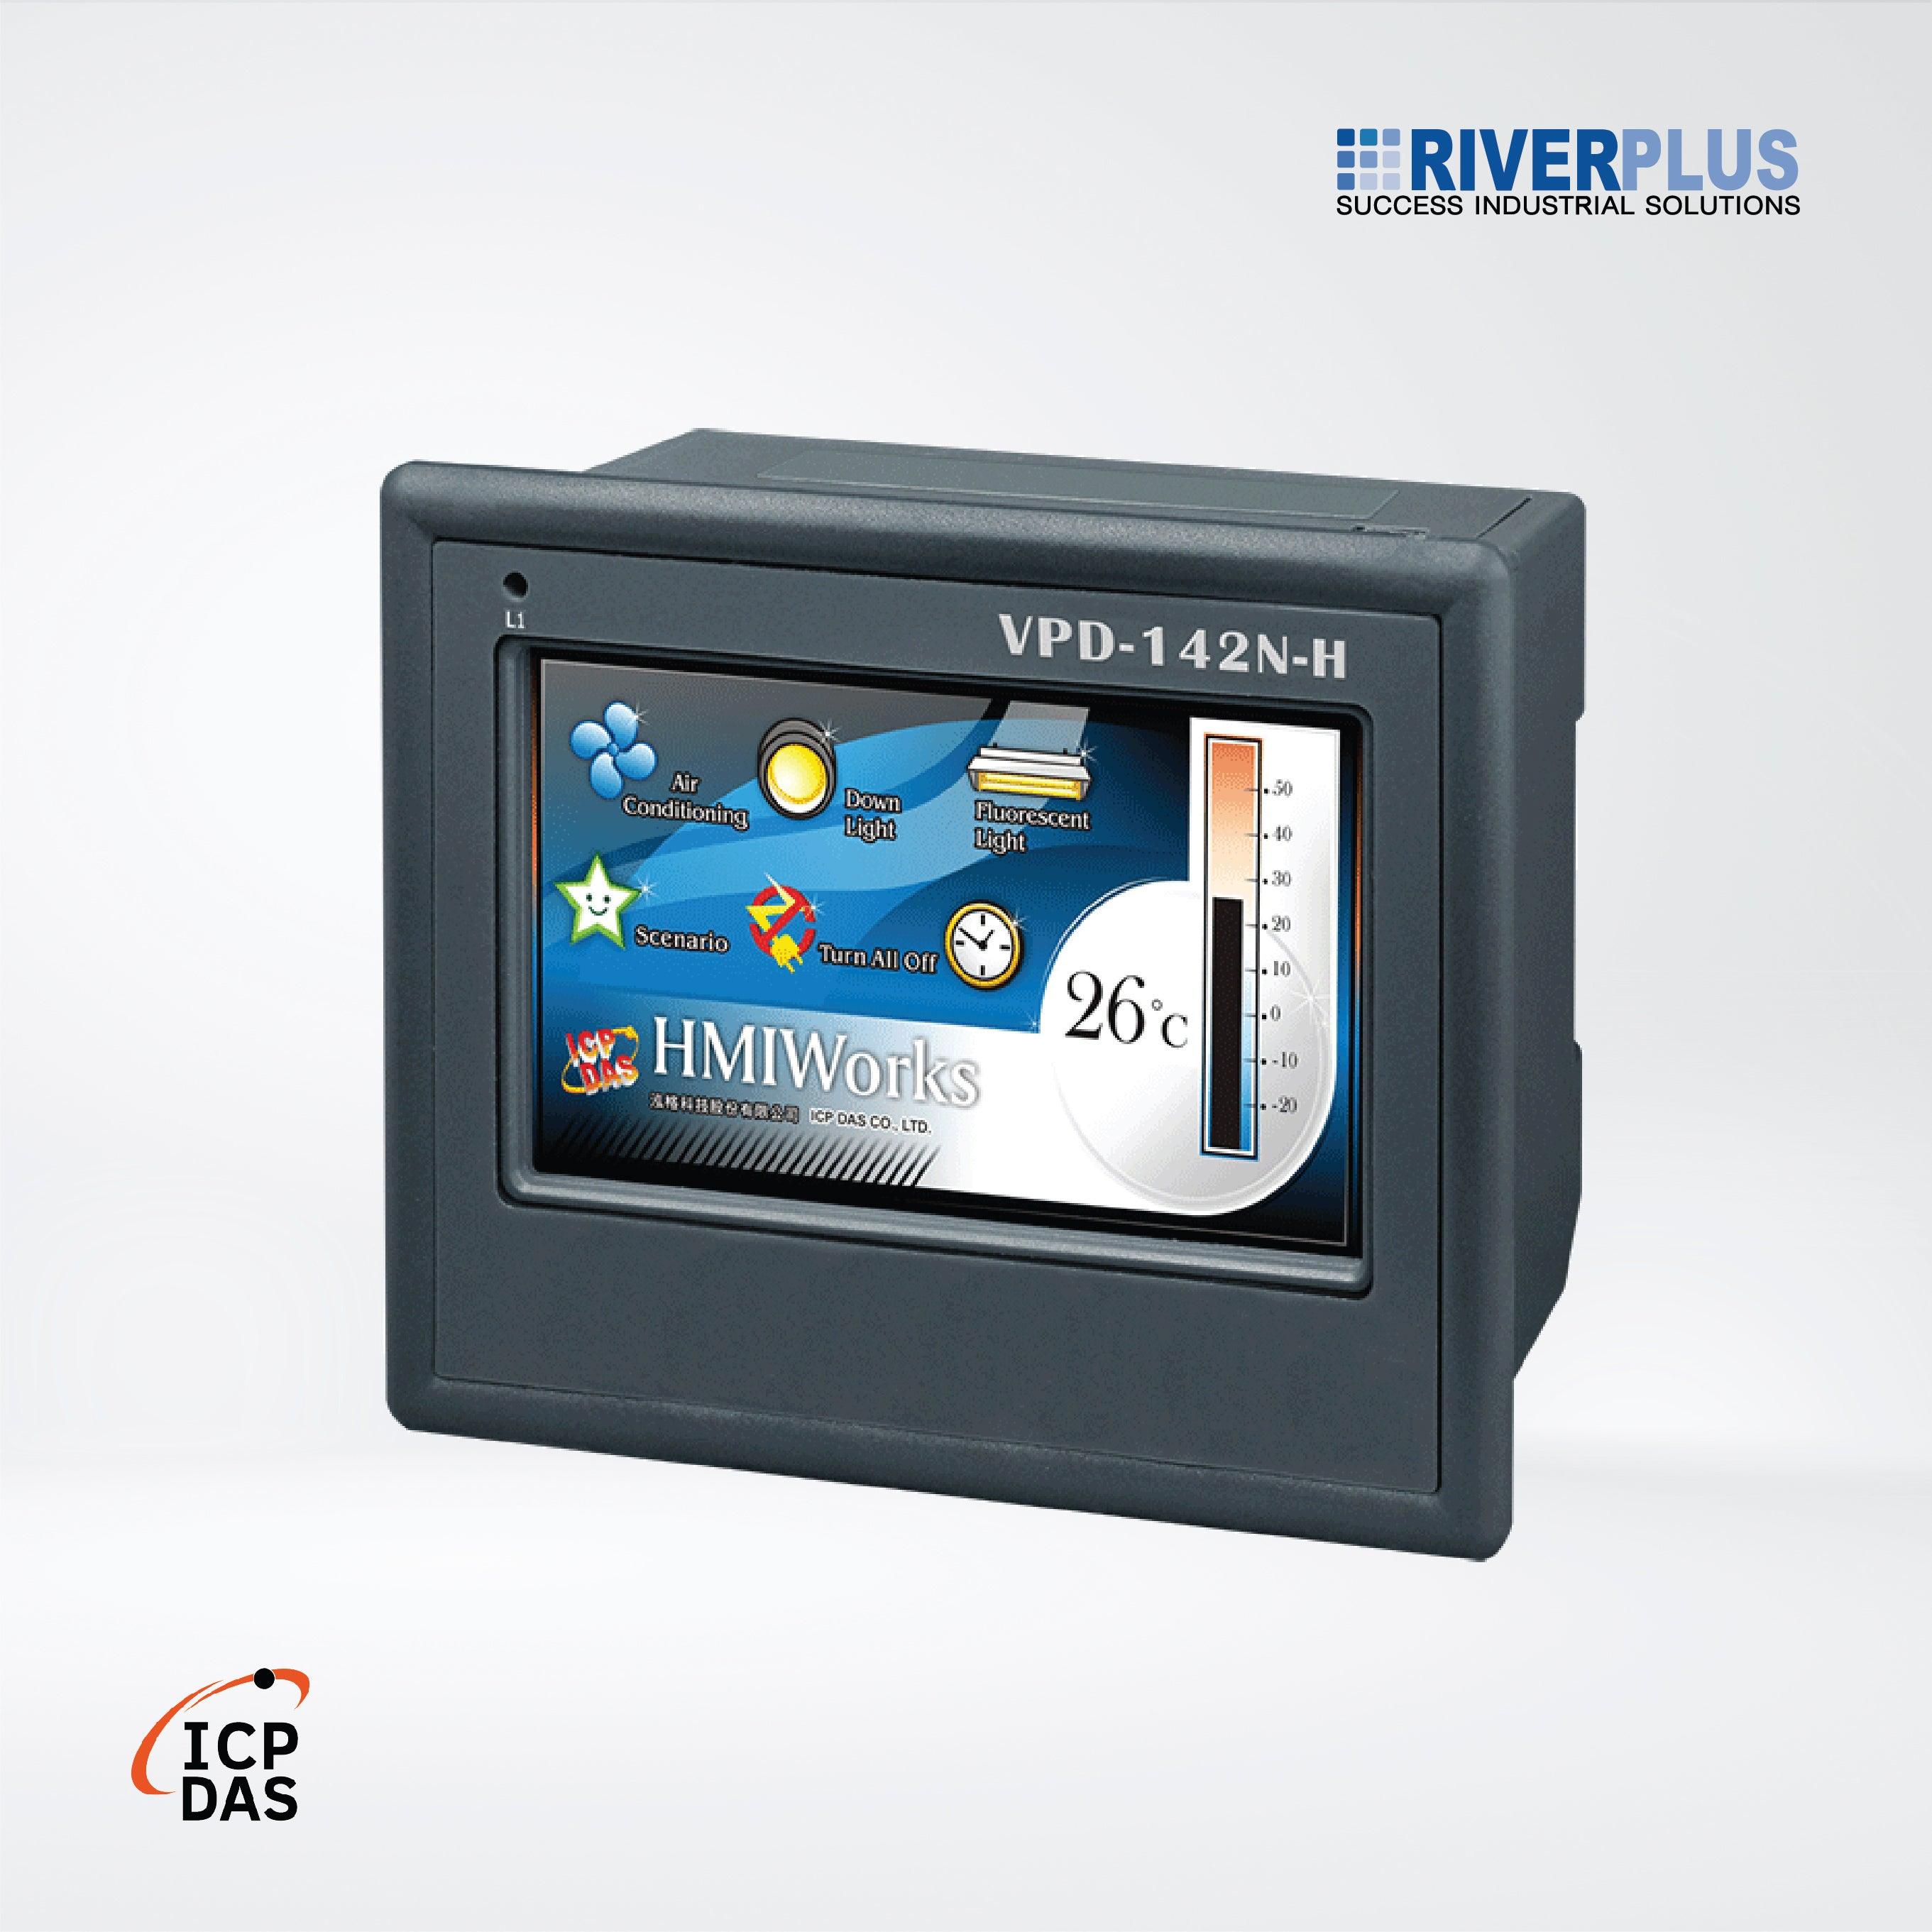 VPD-142N-H 4.3" Touch HMI Device with 2 x RS-232/RS-485 - Riverplus